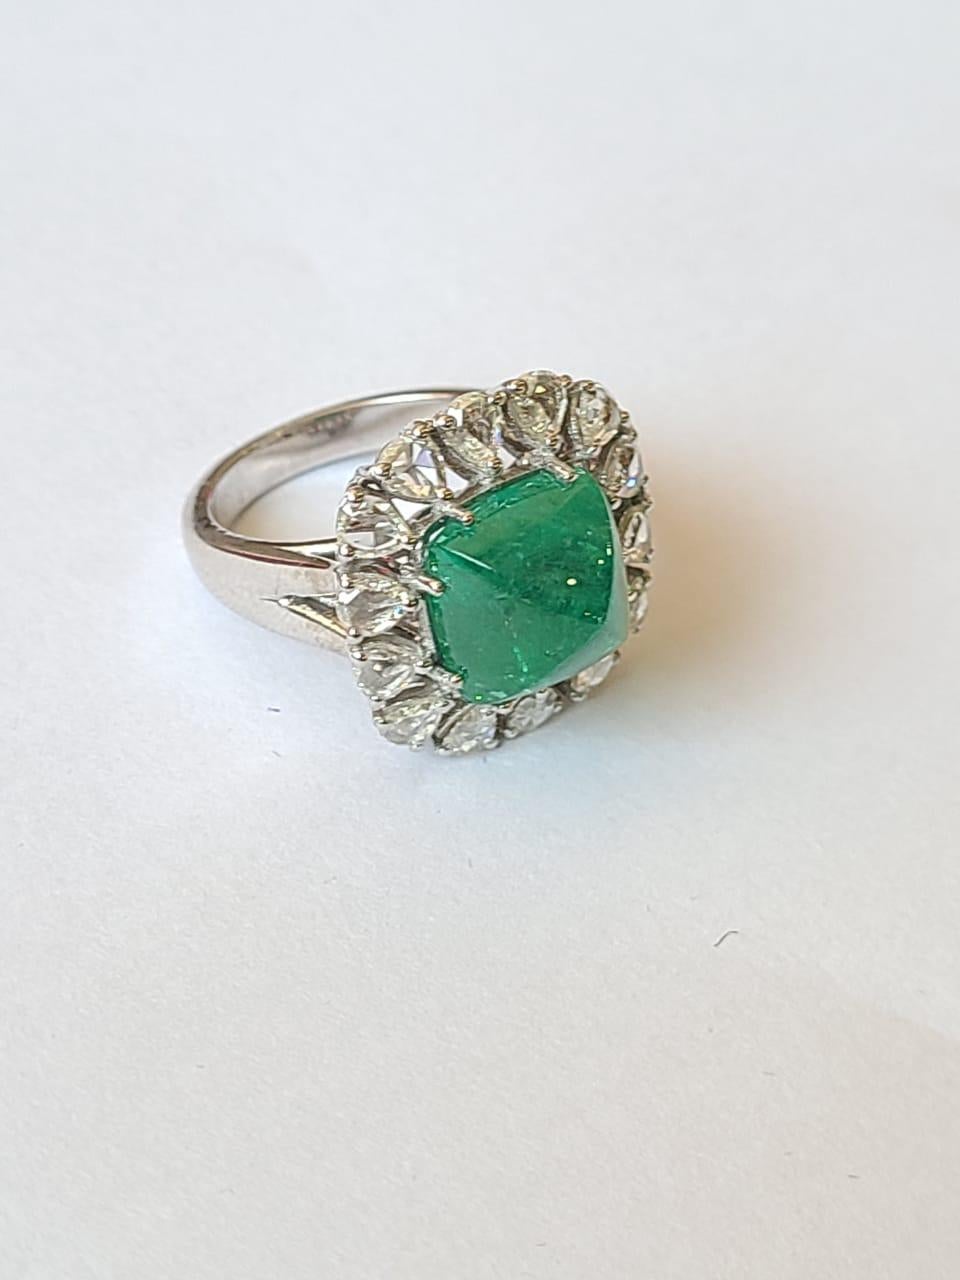 A very dainty and beautiful Emerald Cocktail/ Engagement Ring set in 18K Gold & Diamonds. The weight of the Emerald sugarloaf cabochon is 5.76 carats. The Emerald is of Zambian origin and is completely natural, without any treatment. The weight of